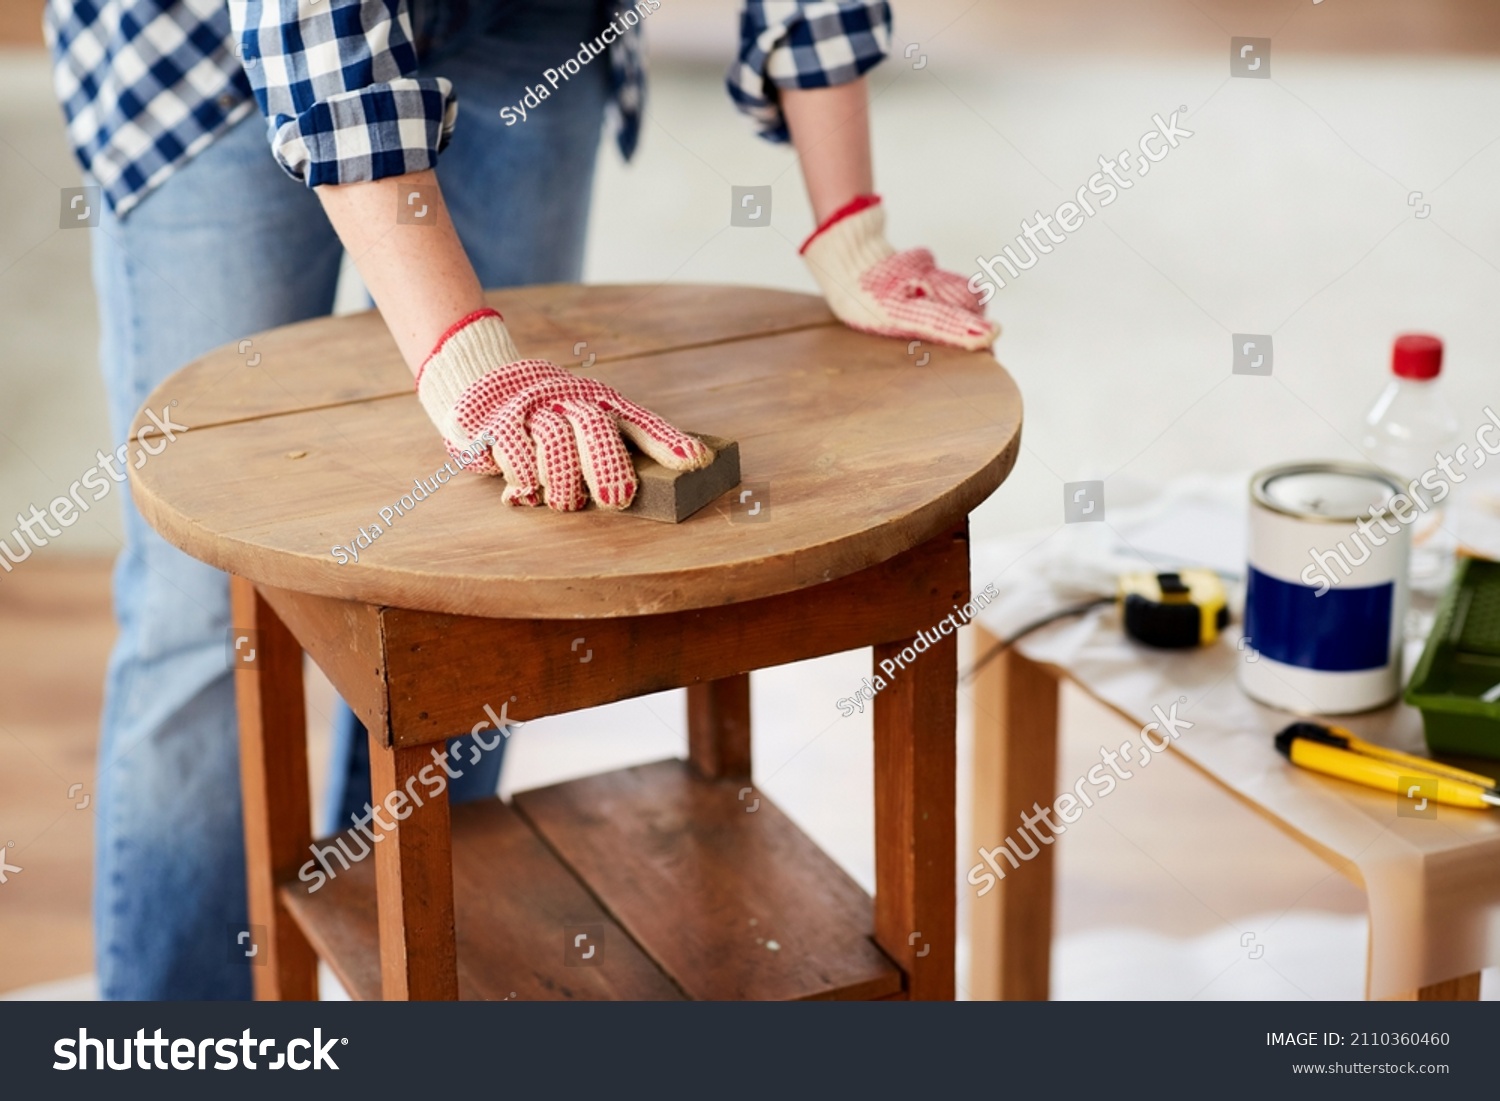 furniture renovation, diy and home improvement concept - close up of woman sanding old wooden table with sponge #2110360460